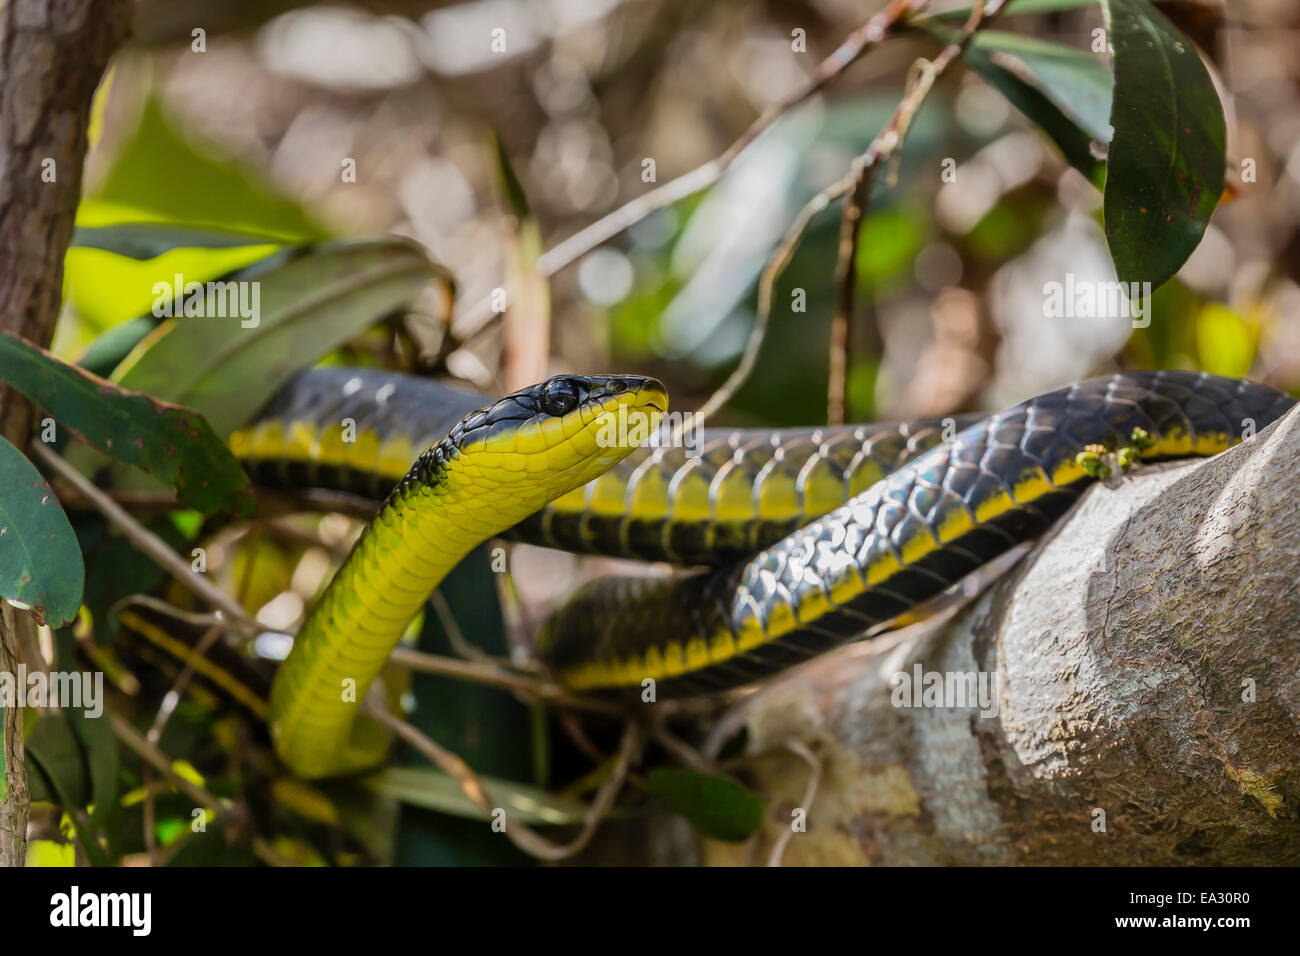 An adult Australian tree snake, on the banks of the Daintree River, Daintree rain forest, Queensland, Australia Stock Photo